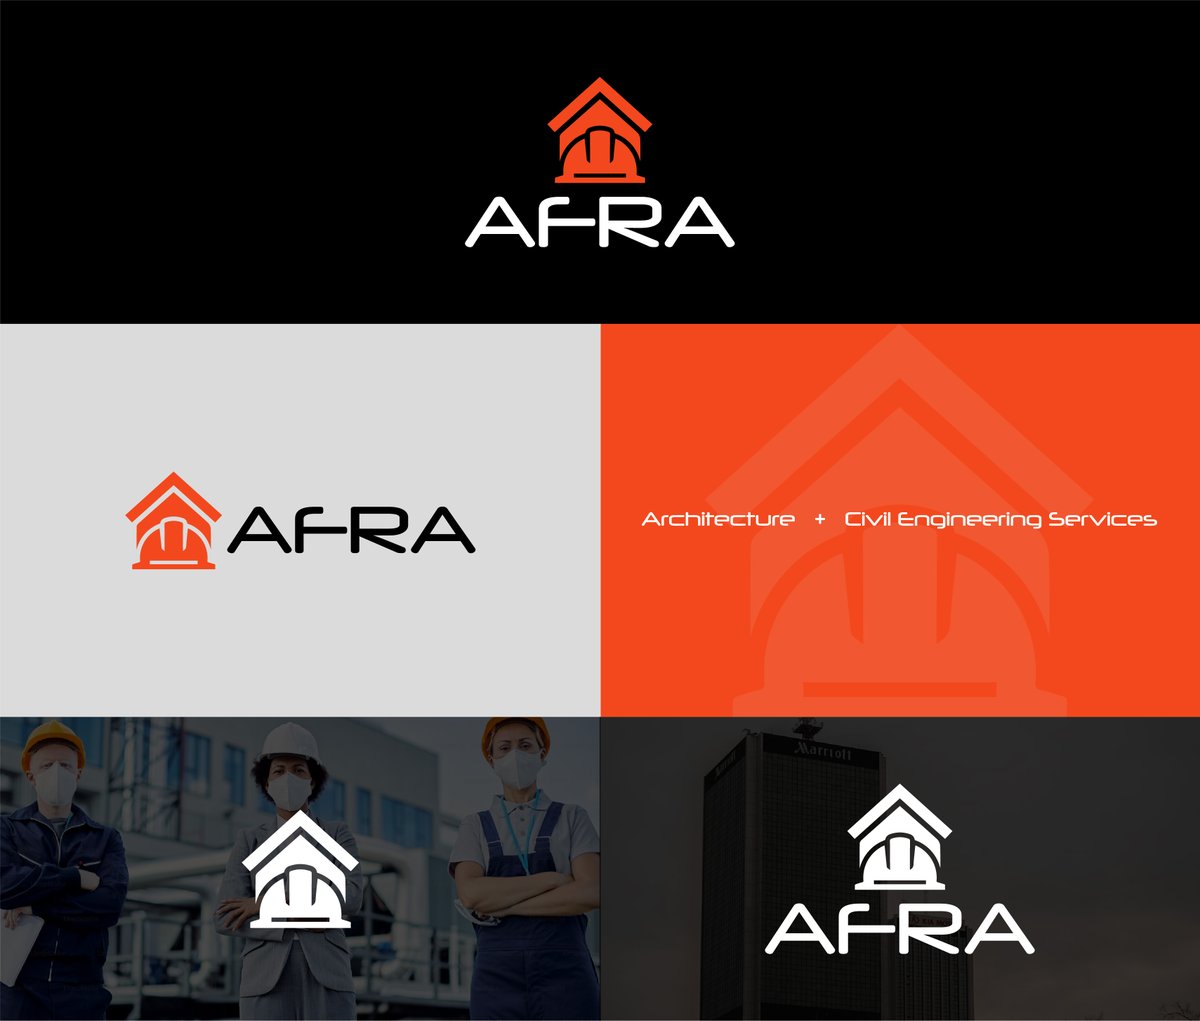 Logo Name: AFRA
Concept: architecture and civil engineering services.

#logo #logodesigner #vectplus #logodesigner #logodesigner #logo #branding #PiximLab #graphicdesign #graphicdesigner #realestate #engineering #civilengineering #house #home #services